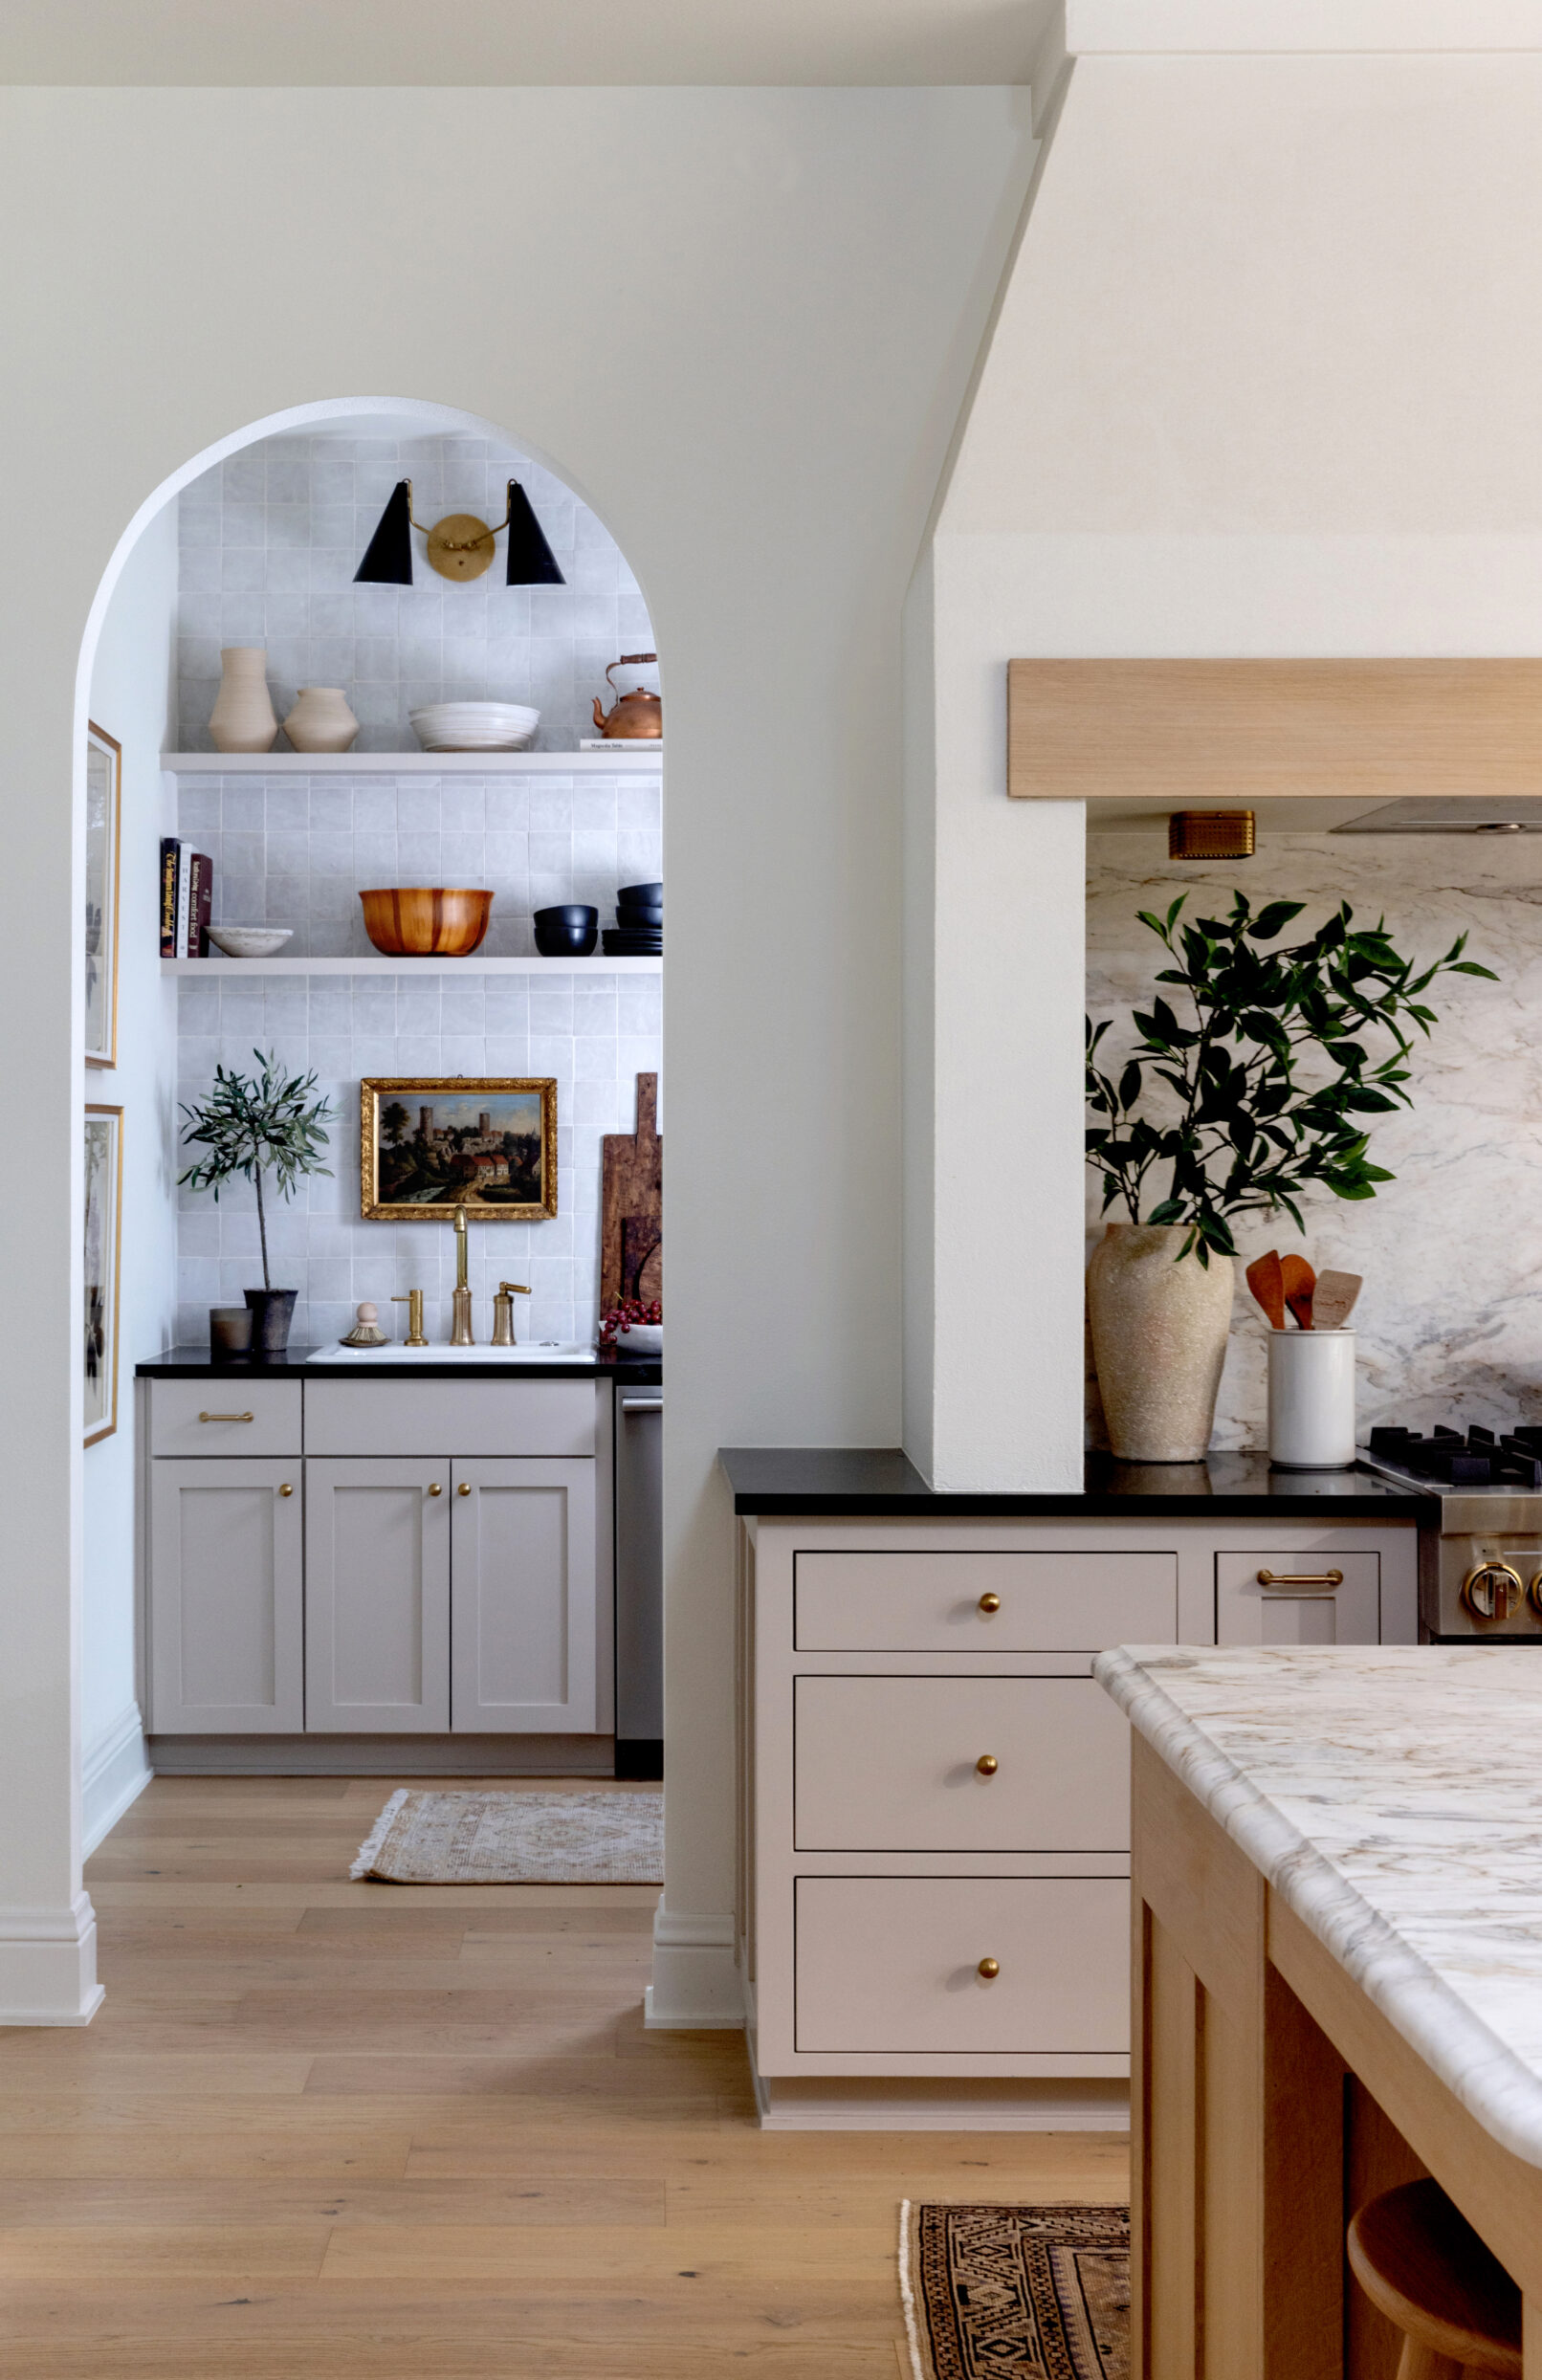 An arched doorway leads to the pantry in this interior photo of a kitchen.